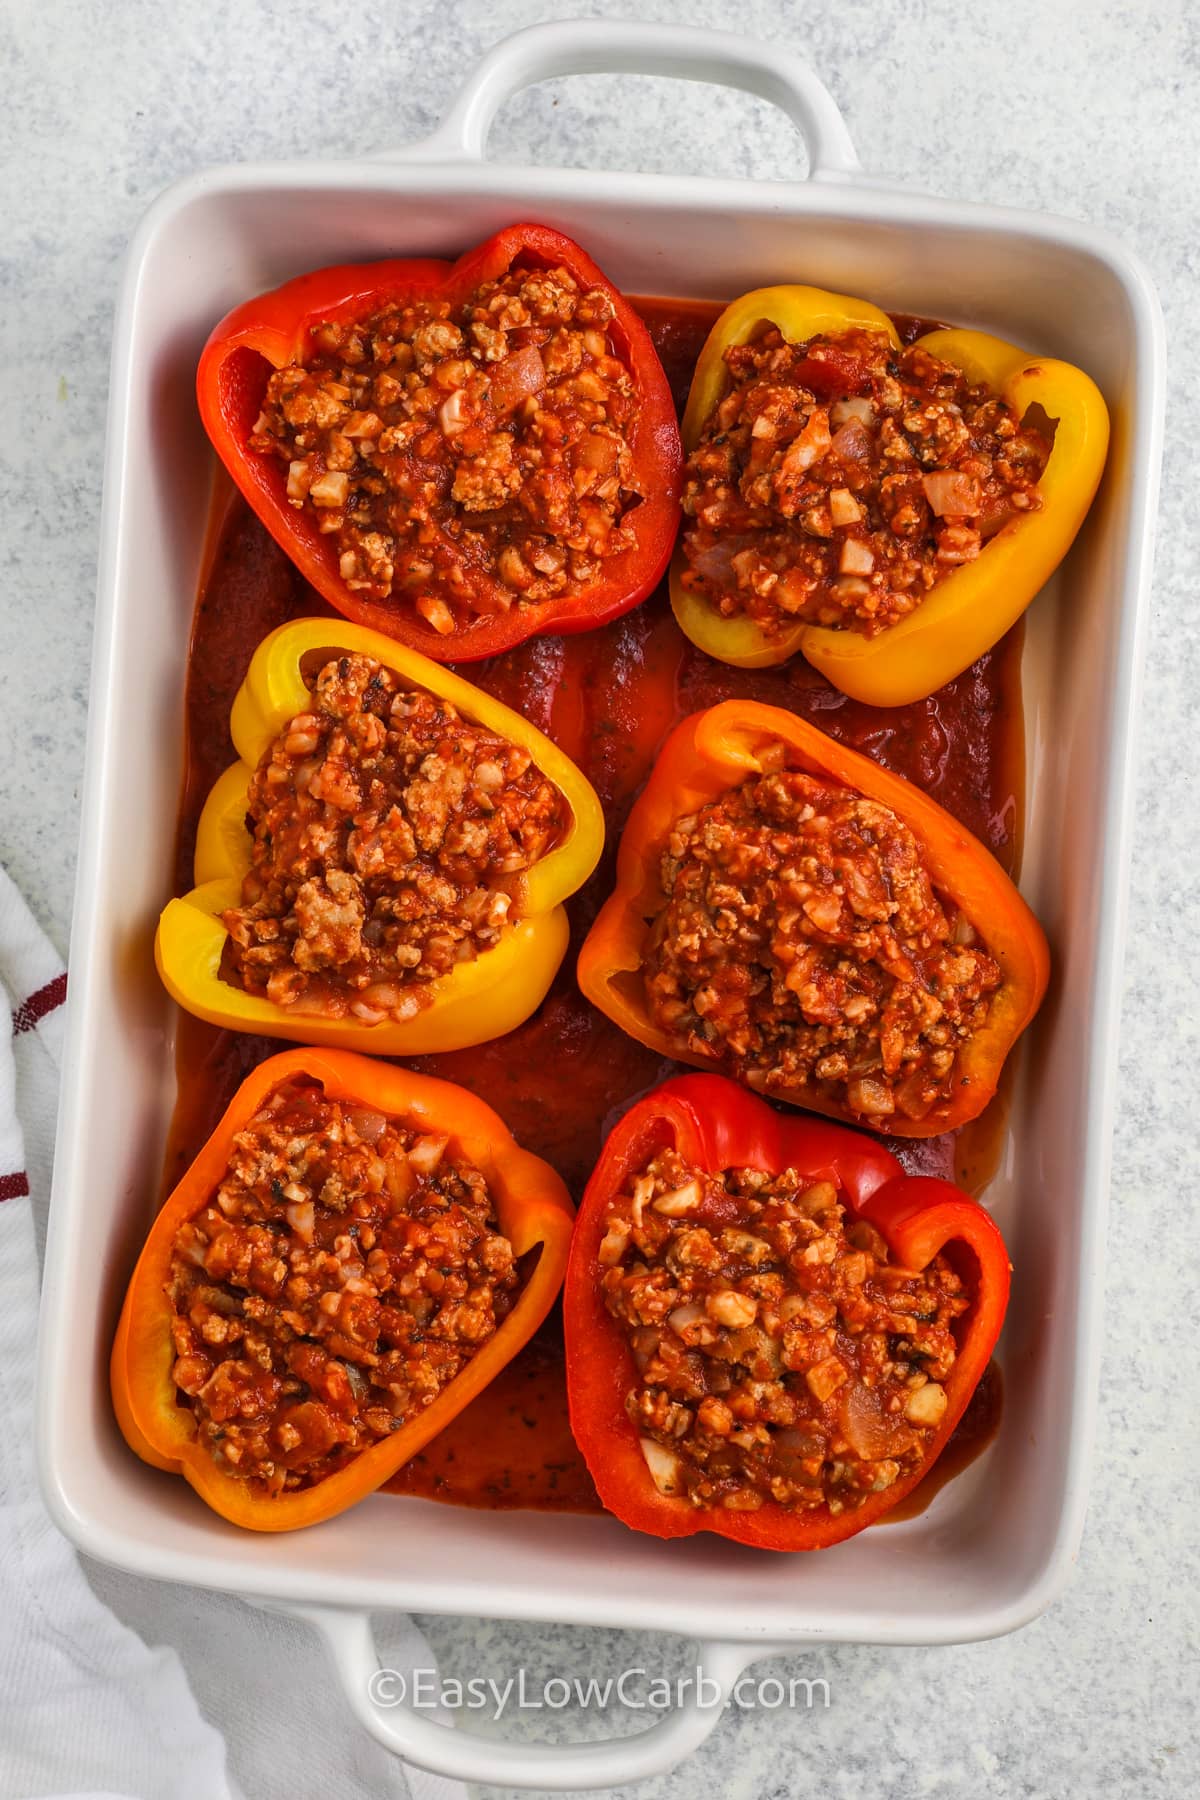 adding turkey mixture to peppers to make Ground Turkey Stuffed Peppers